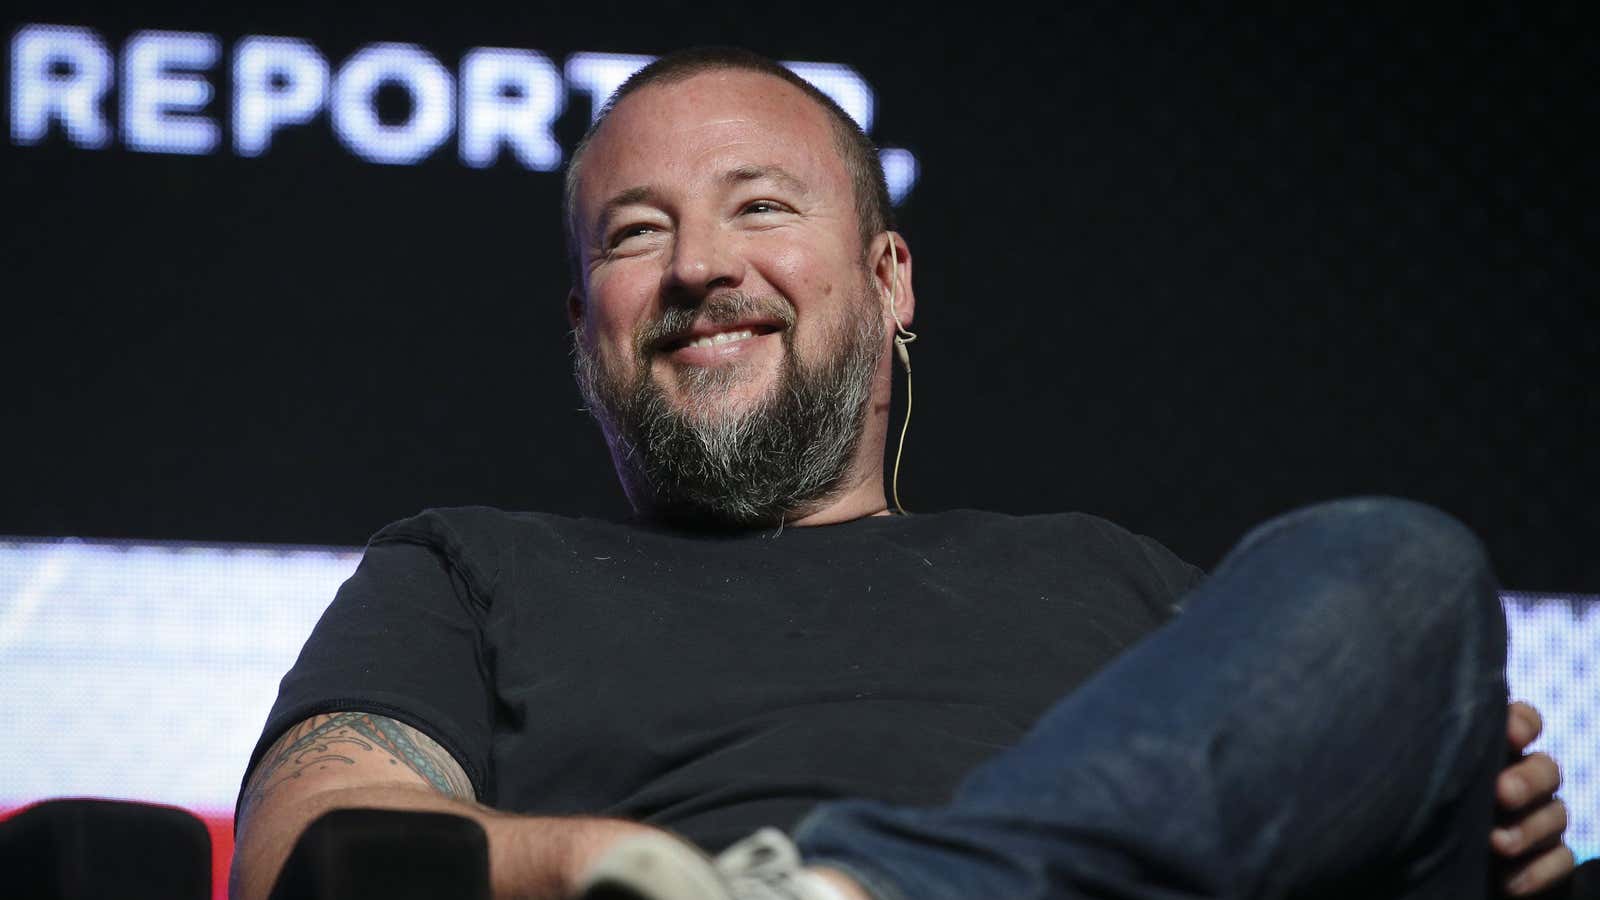 IMAGE DISTRIBUTED FOR PROMAXBDA – Shane Smith, founder and CEO of VICE, smiles in an interview with David Carr, The New York Times culture reporter